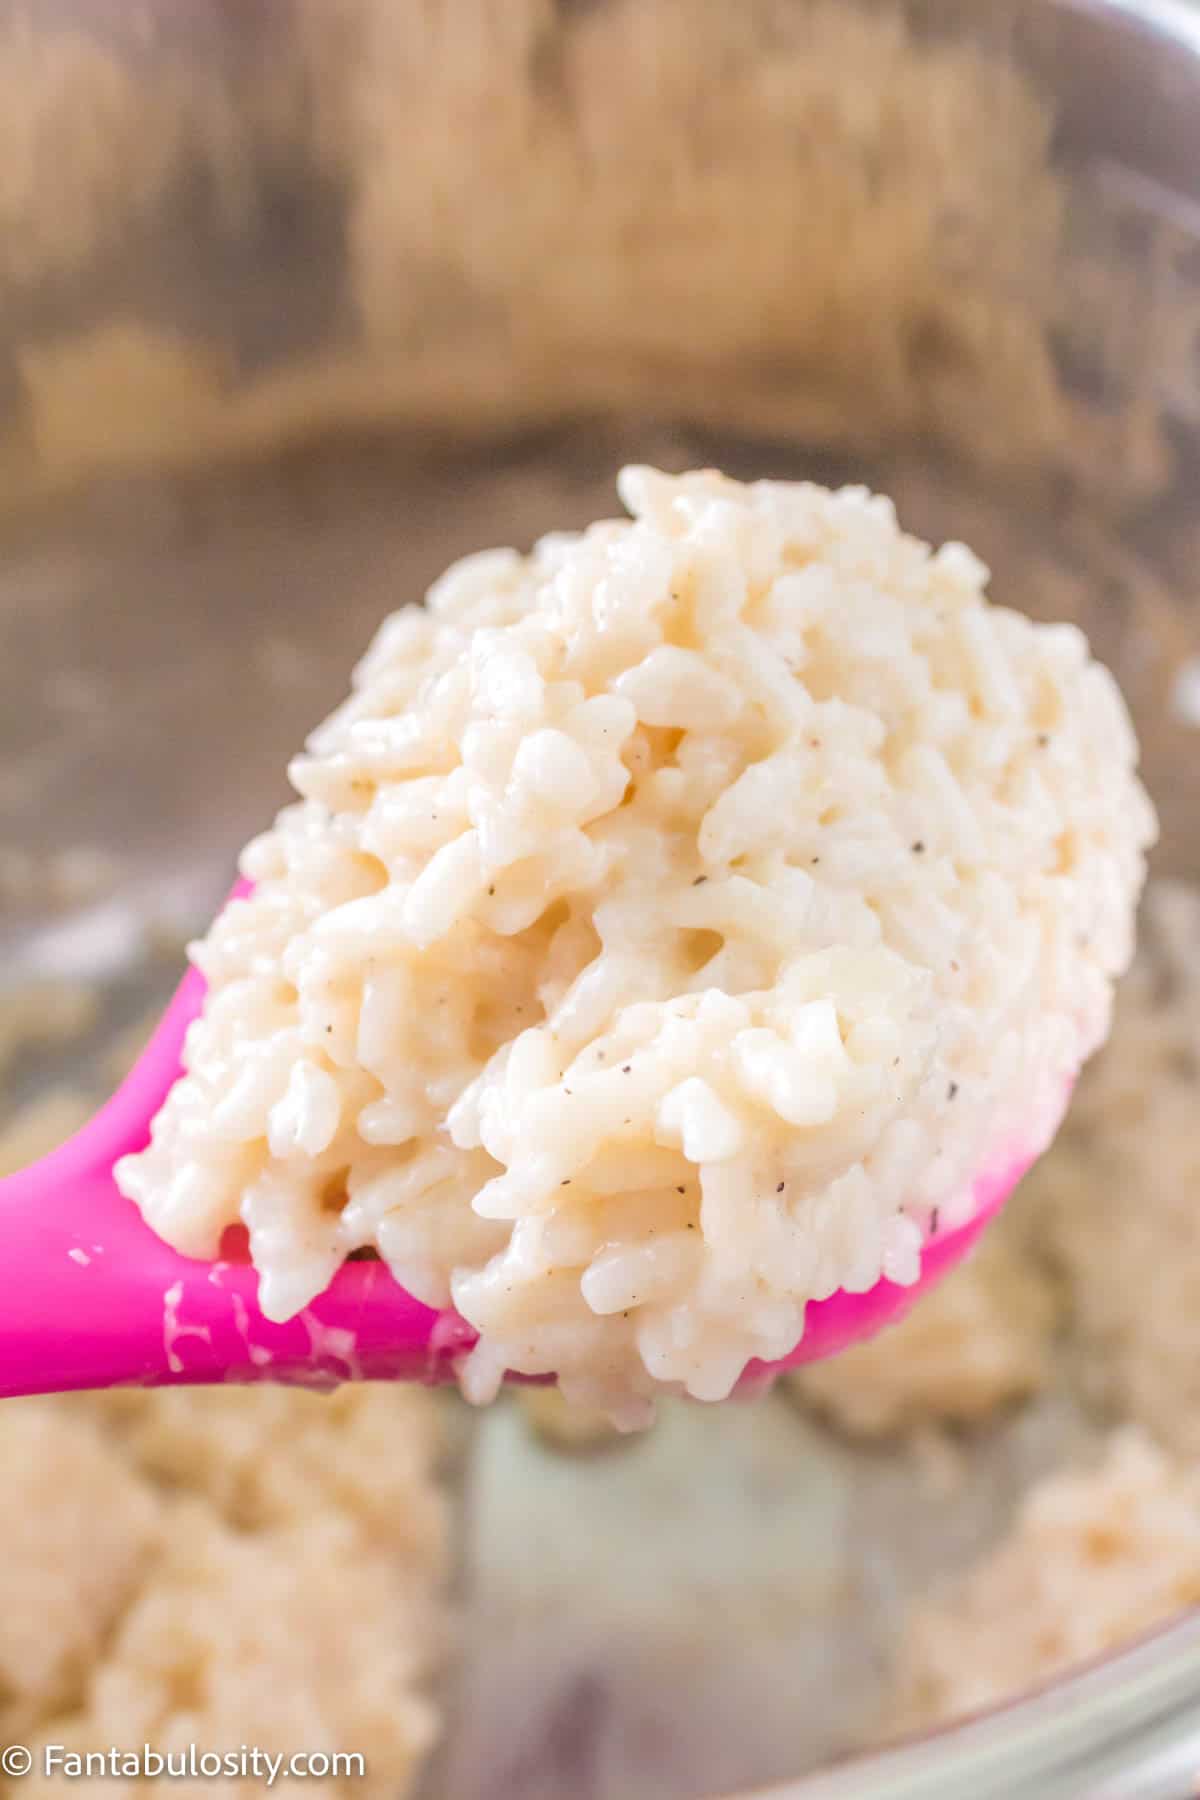 Spoonful of Risotto